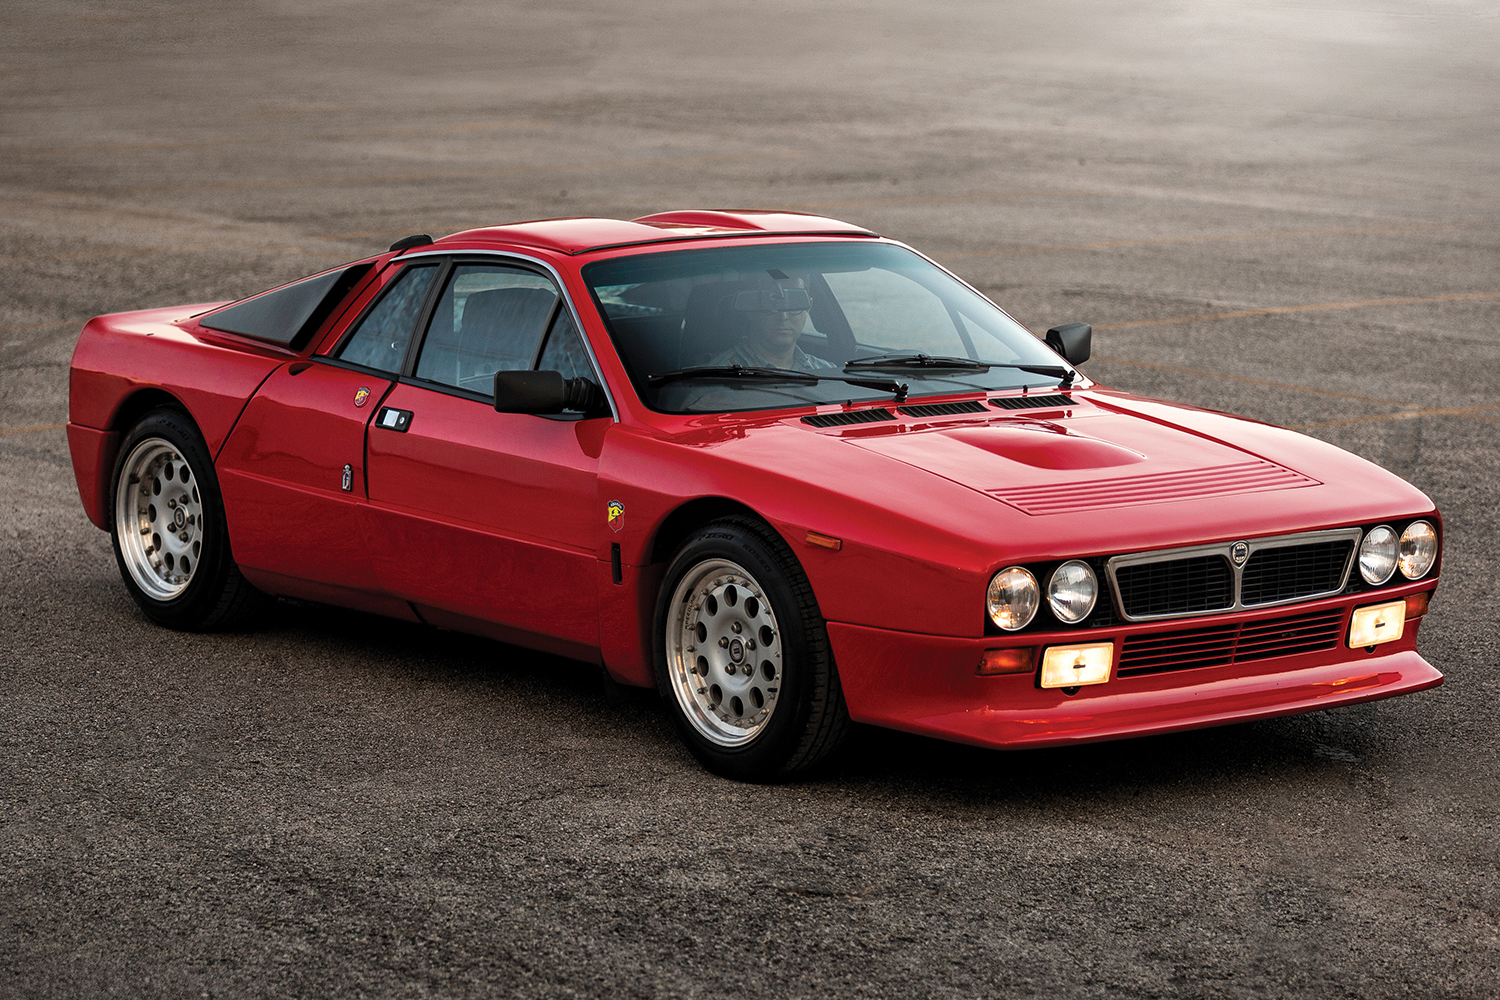 1984 Lancia Rally 037 Stradale RM Sotheby's